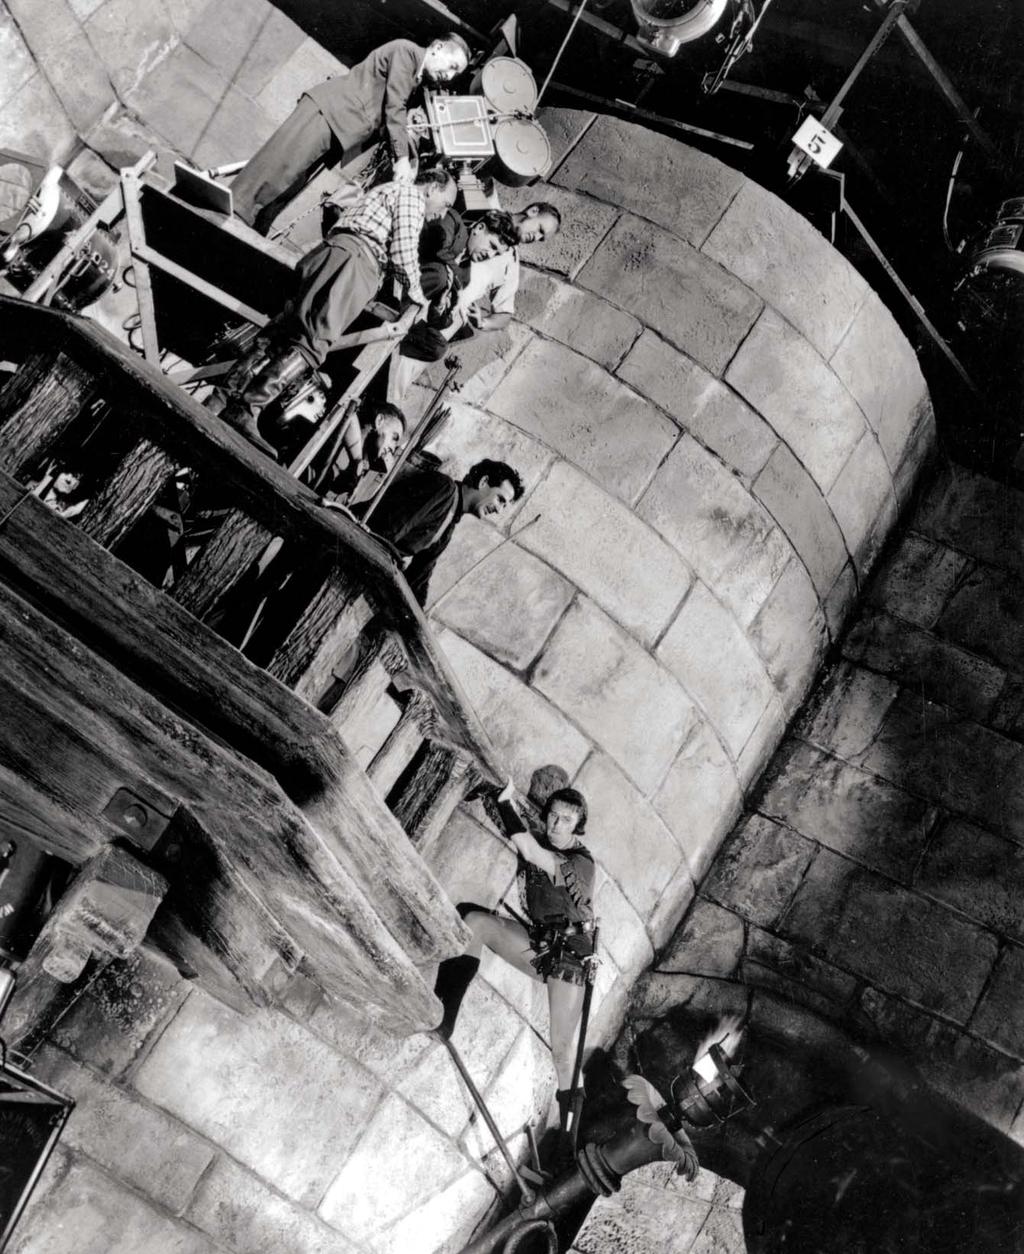 TIMELESS: The influence of Fritz Lang s expressionistic classic Metropolis (1927) cannot be overestimated.